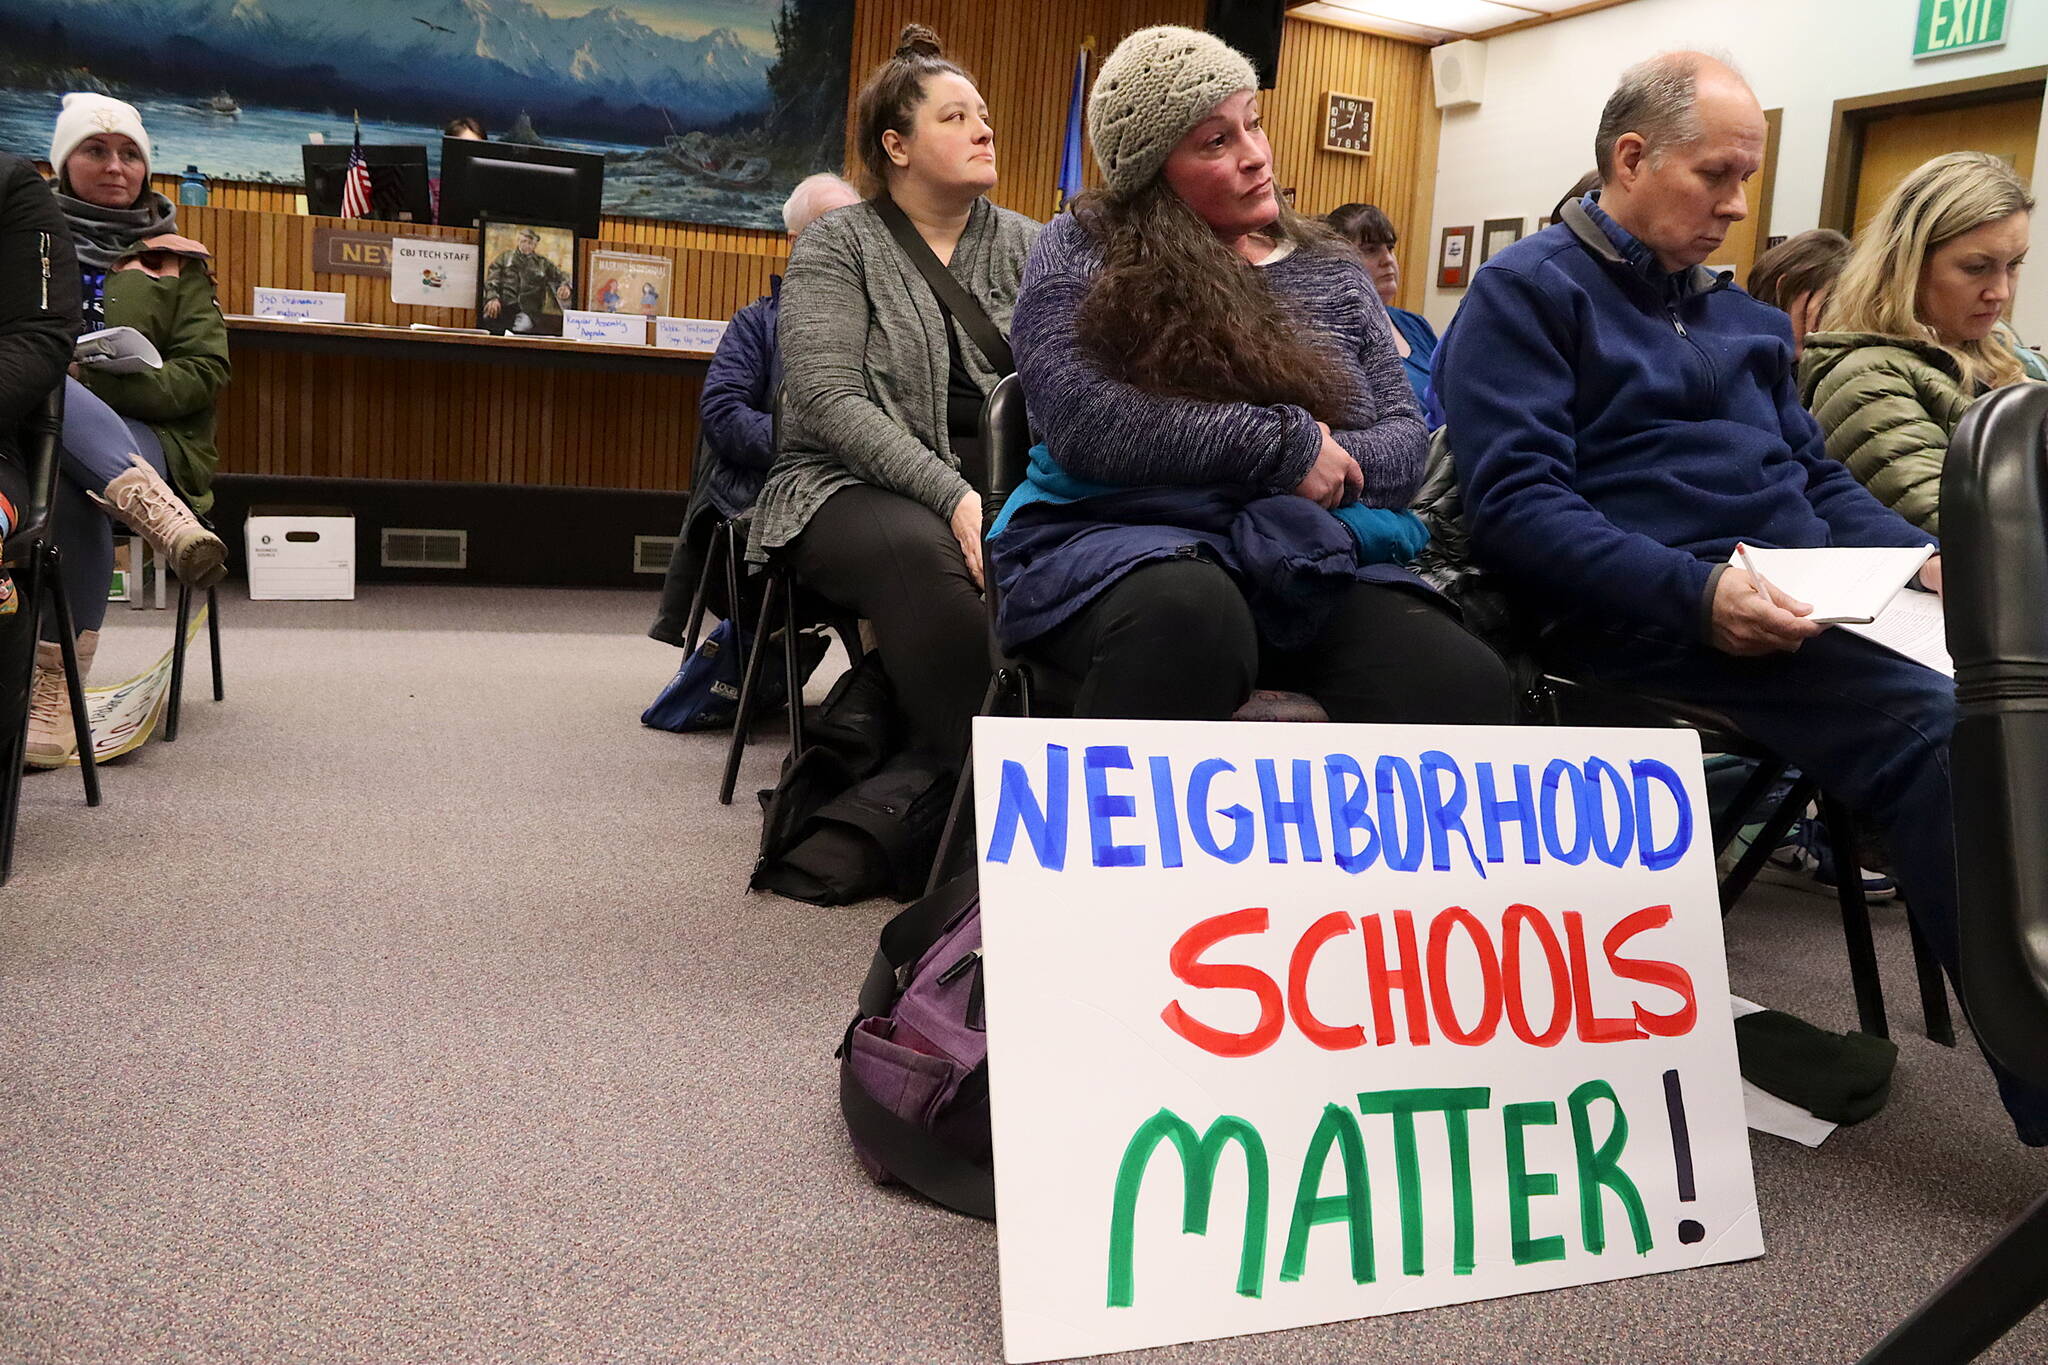 A sign objecting to the Juneau School District’s consolidation plan is displayed by an audience member during a Juneau Assembly meeting Monday night as members consider a $9.7 million bailout package to help solve the district’s financial crisis. (Mark Sabbatini / Juneau Empire)